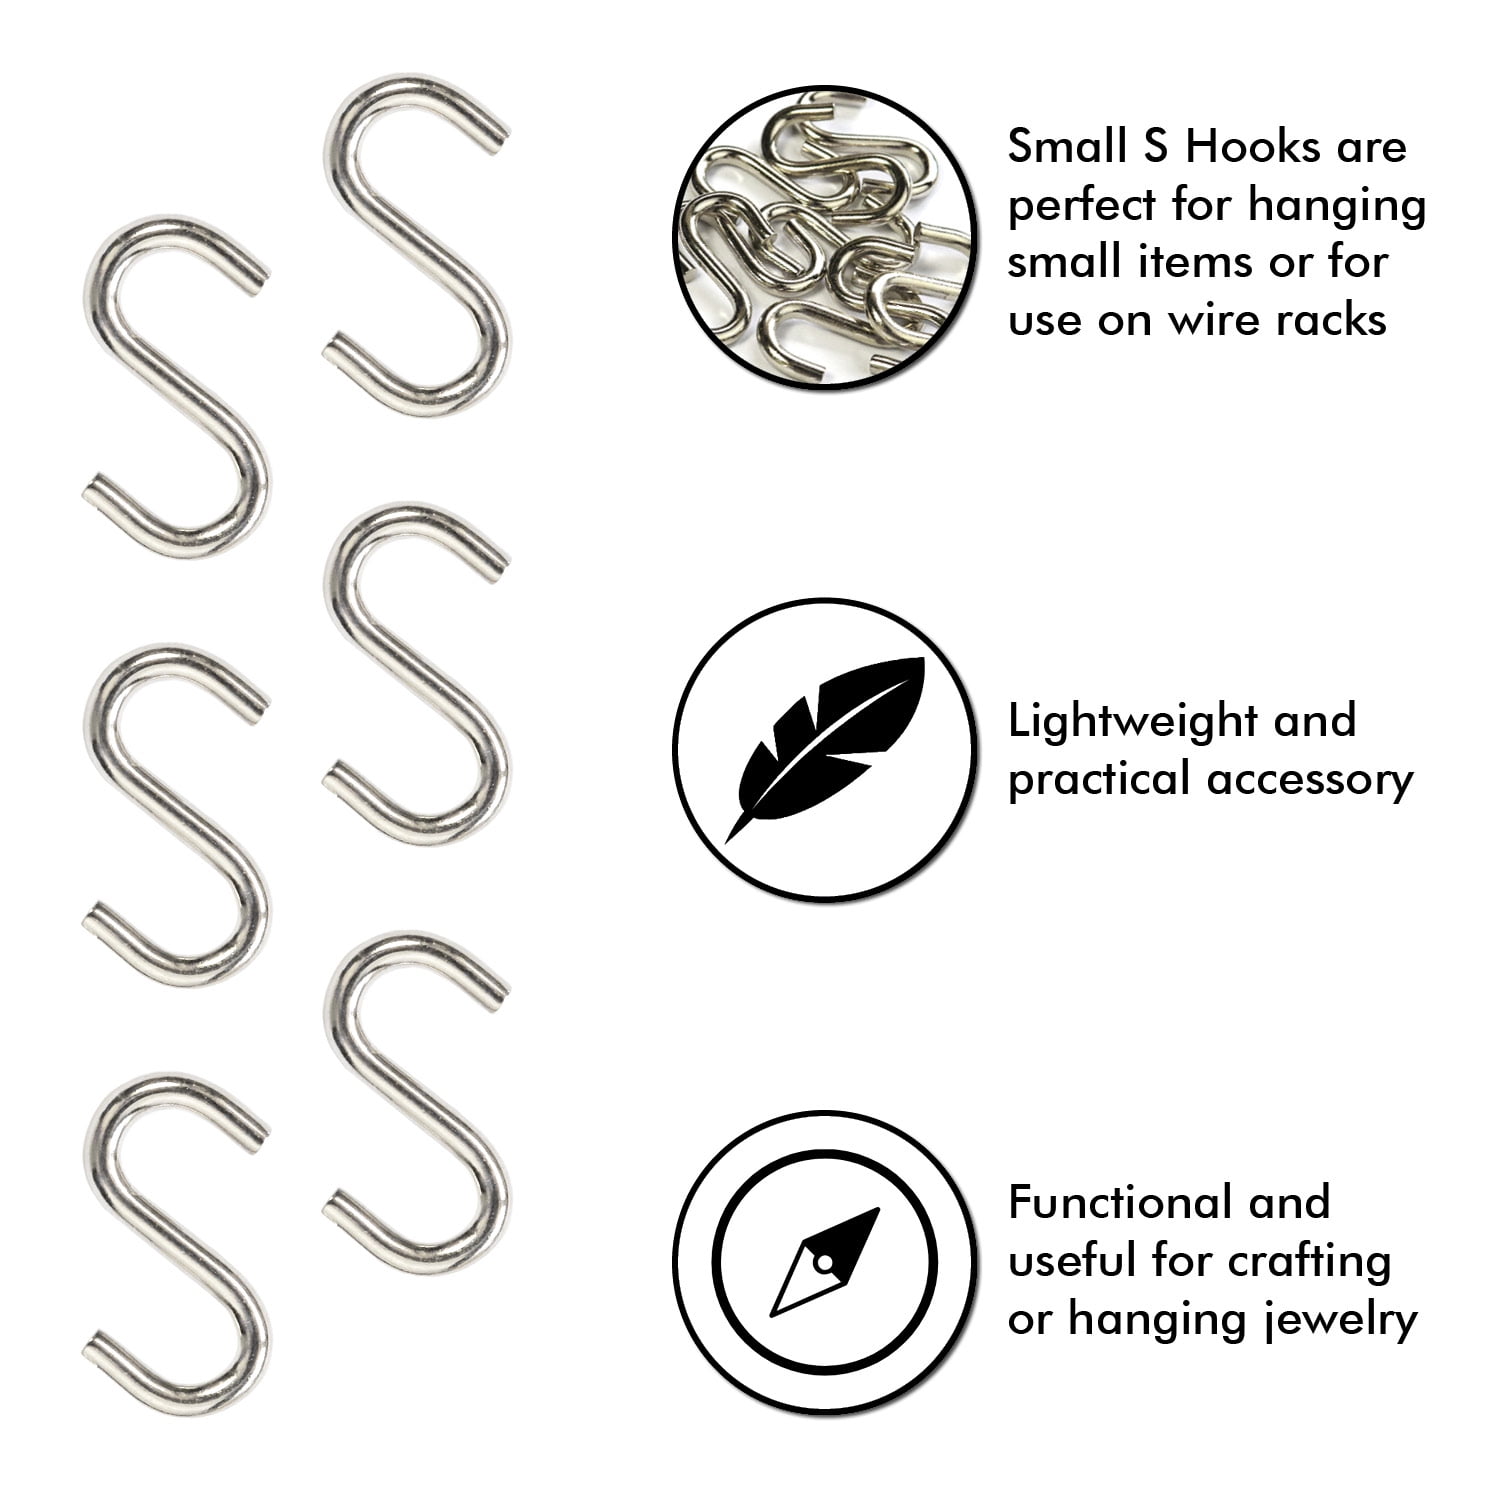 Ergonflow 200pcs Stainless Steel 1 inch S Hook Connectors Mini S-Shaped Hangers Ornament for Jewelry Key Ring Chain Hardware Pet Name Tag Wood Circles